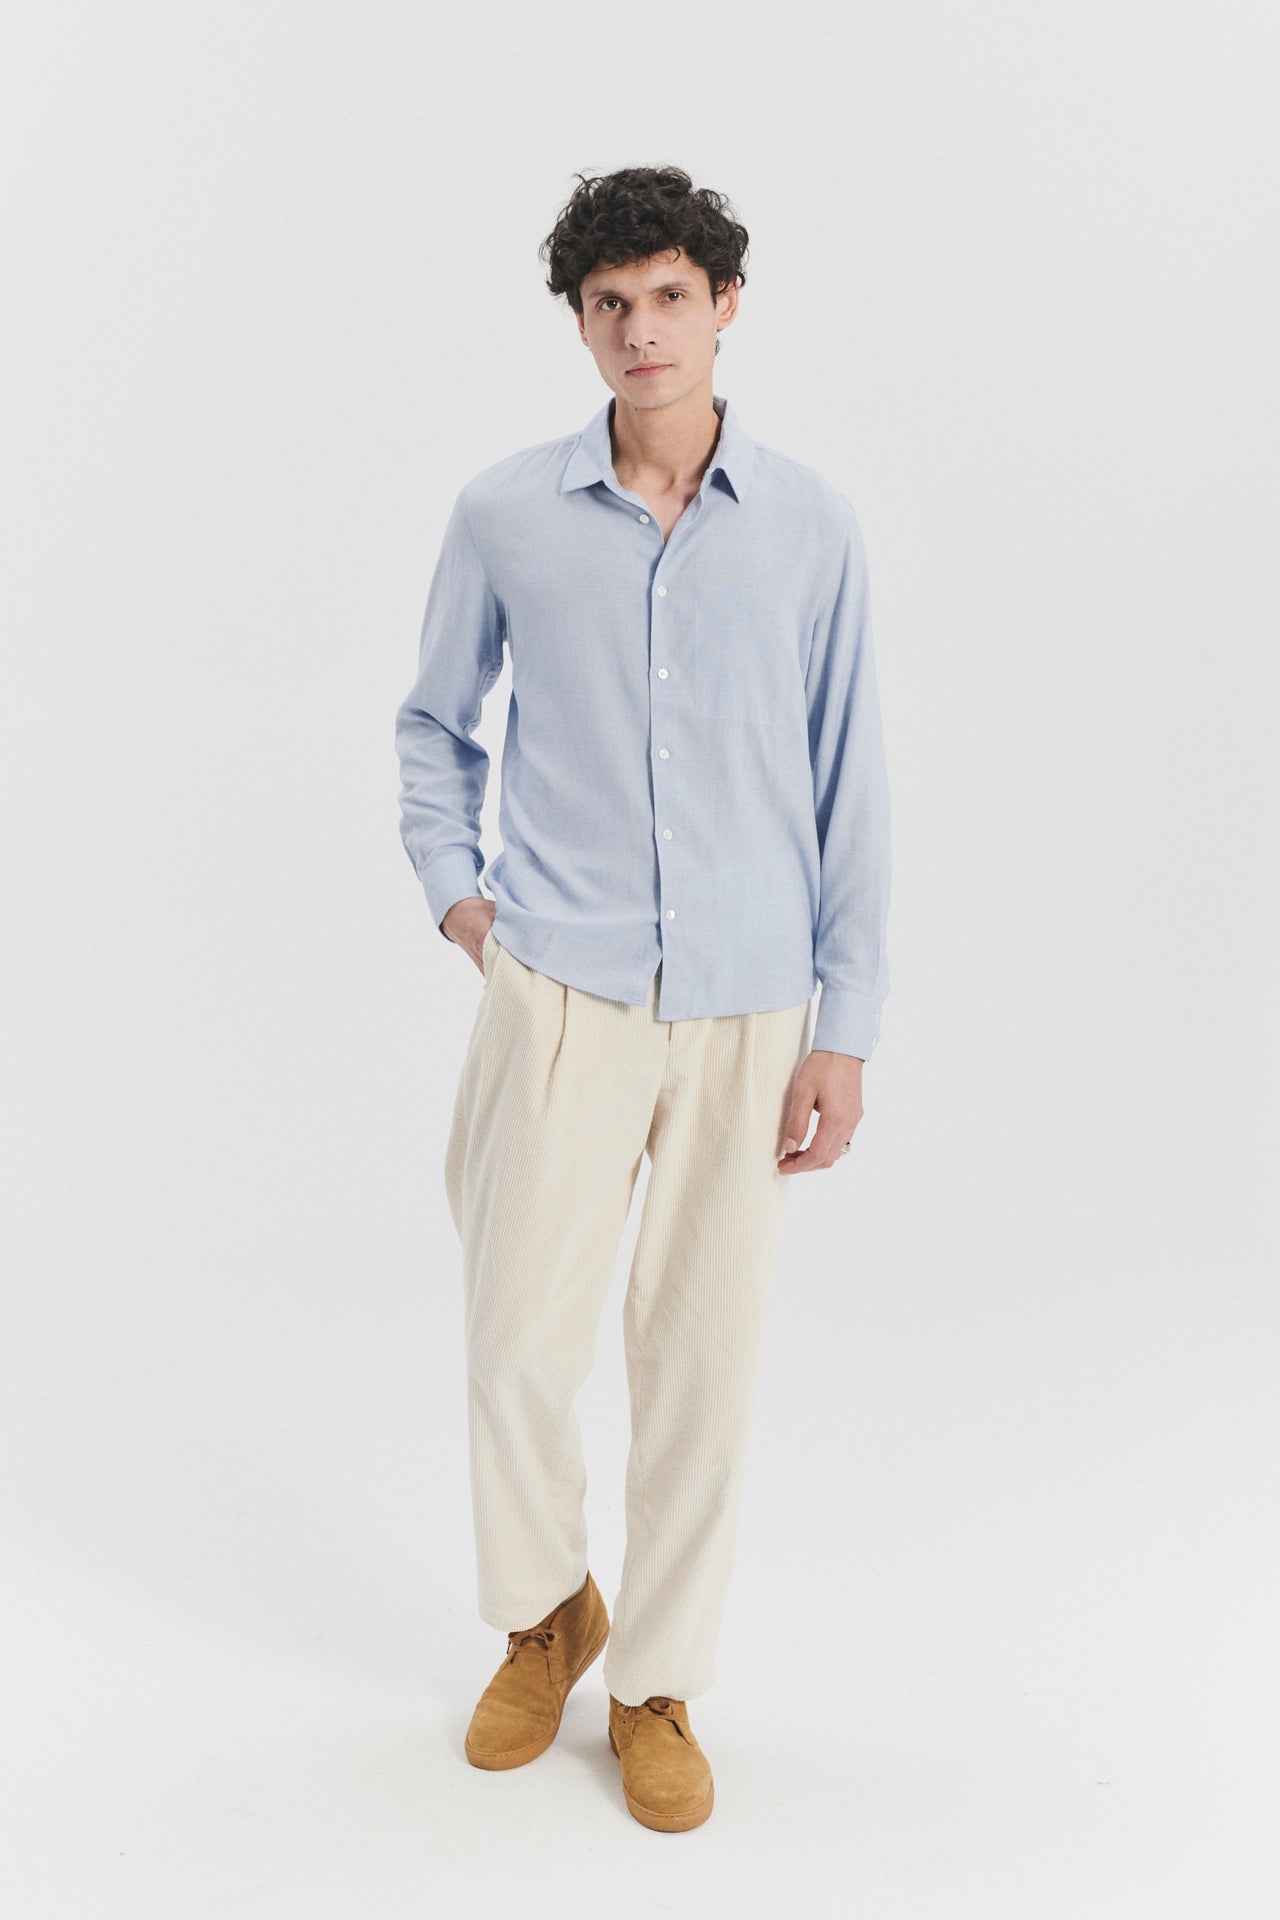 Feel Good Shirt in a Sky Blue Airy Mix of Portuguese Merino Wool and Modal